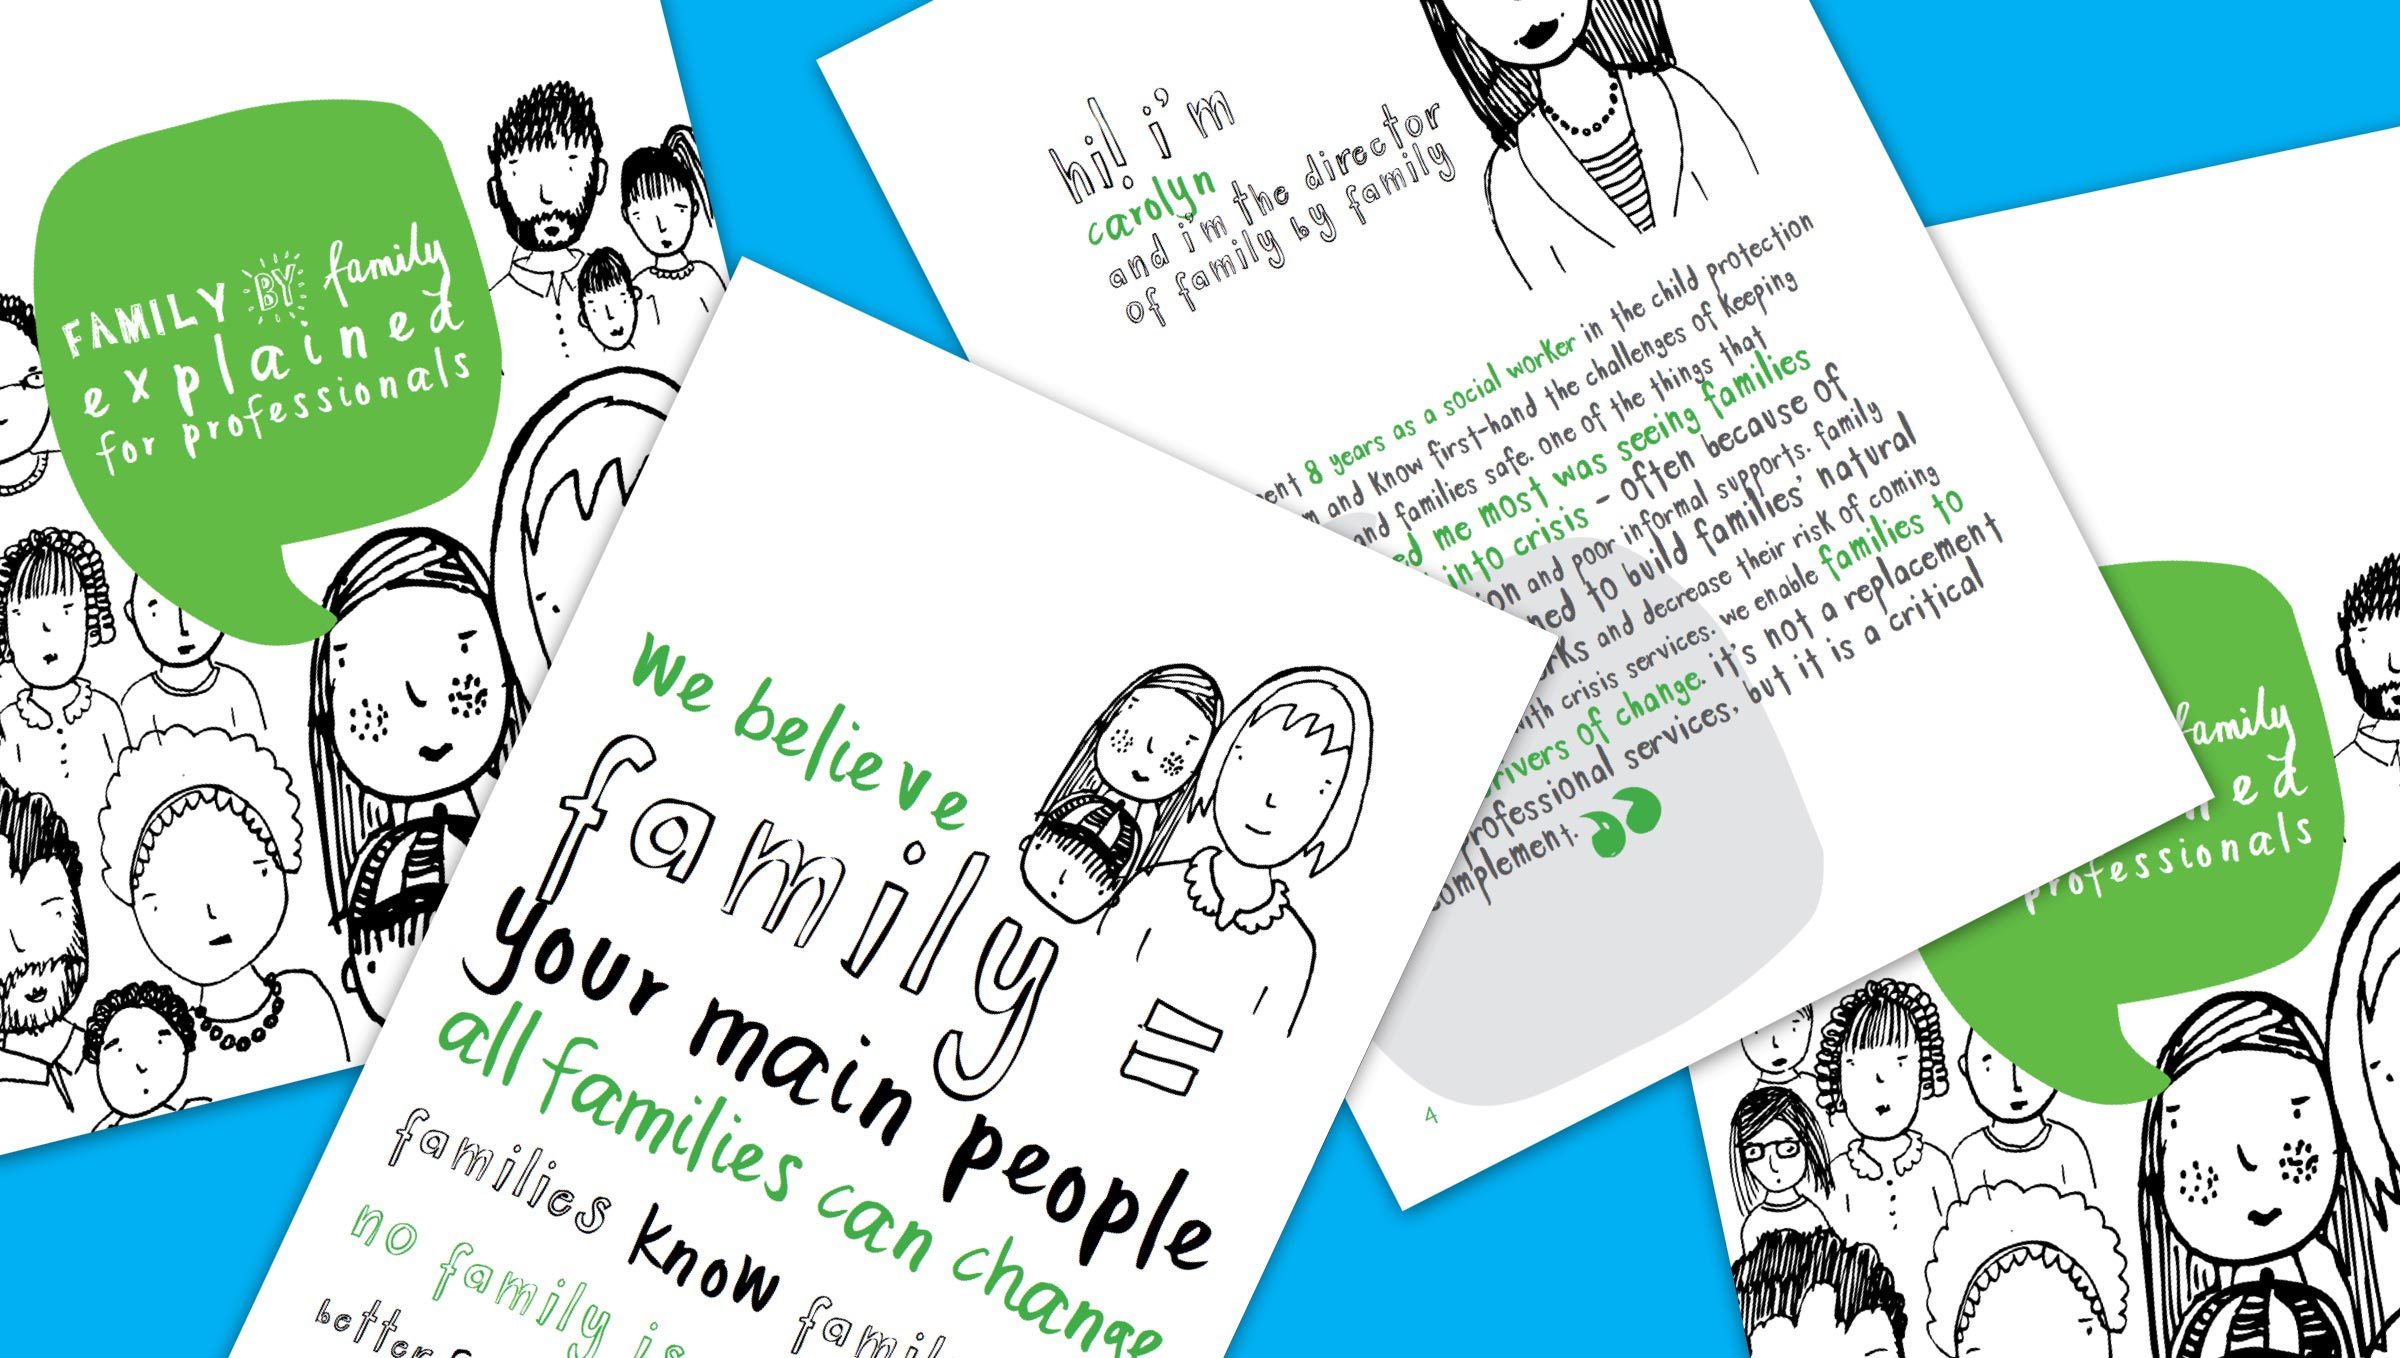 Family by family book illustrations. We believe family = your main people.